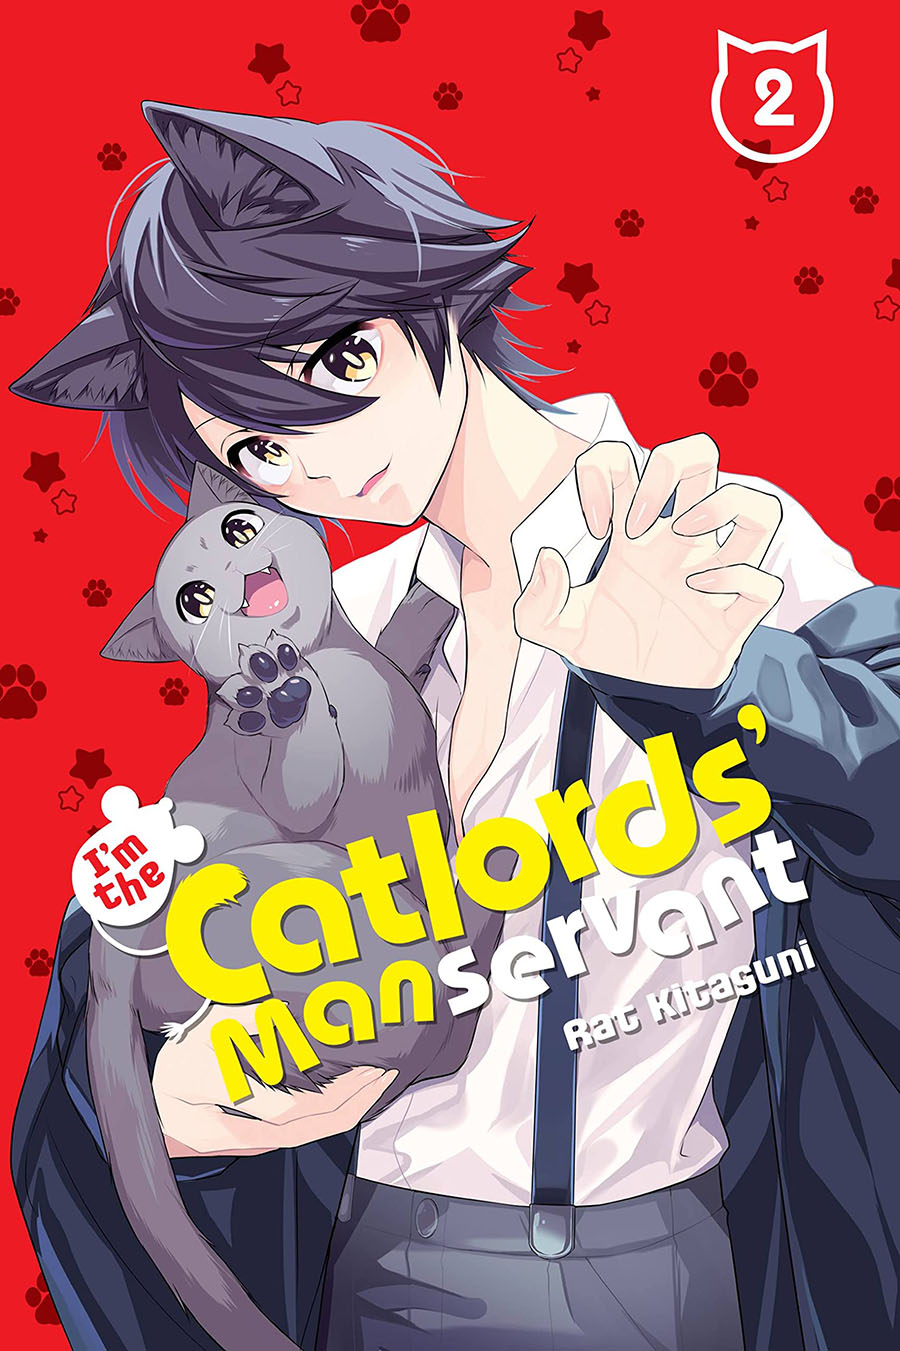 Im The Catlords Manservant Vol 2 GN